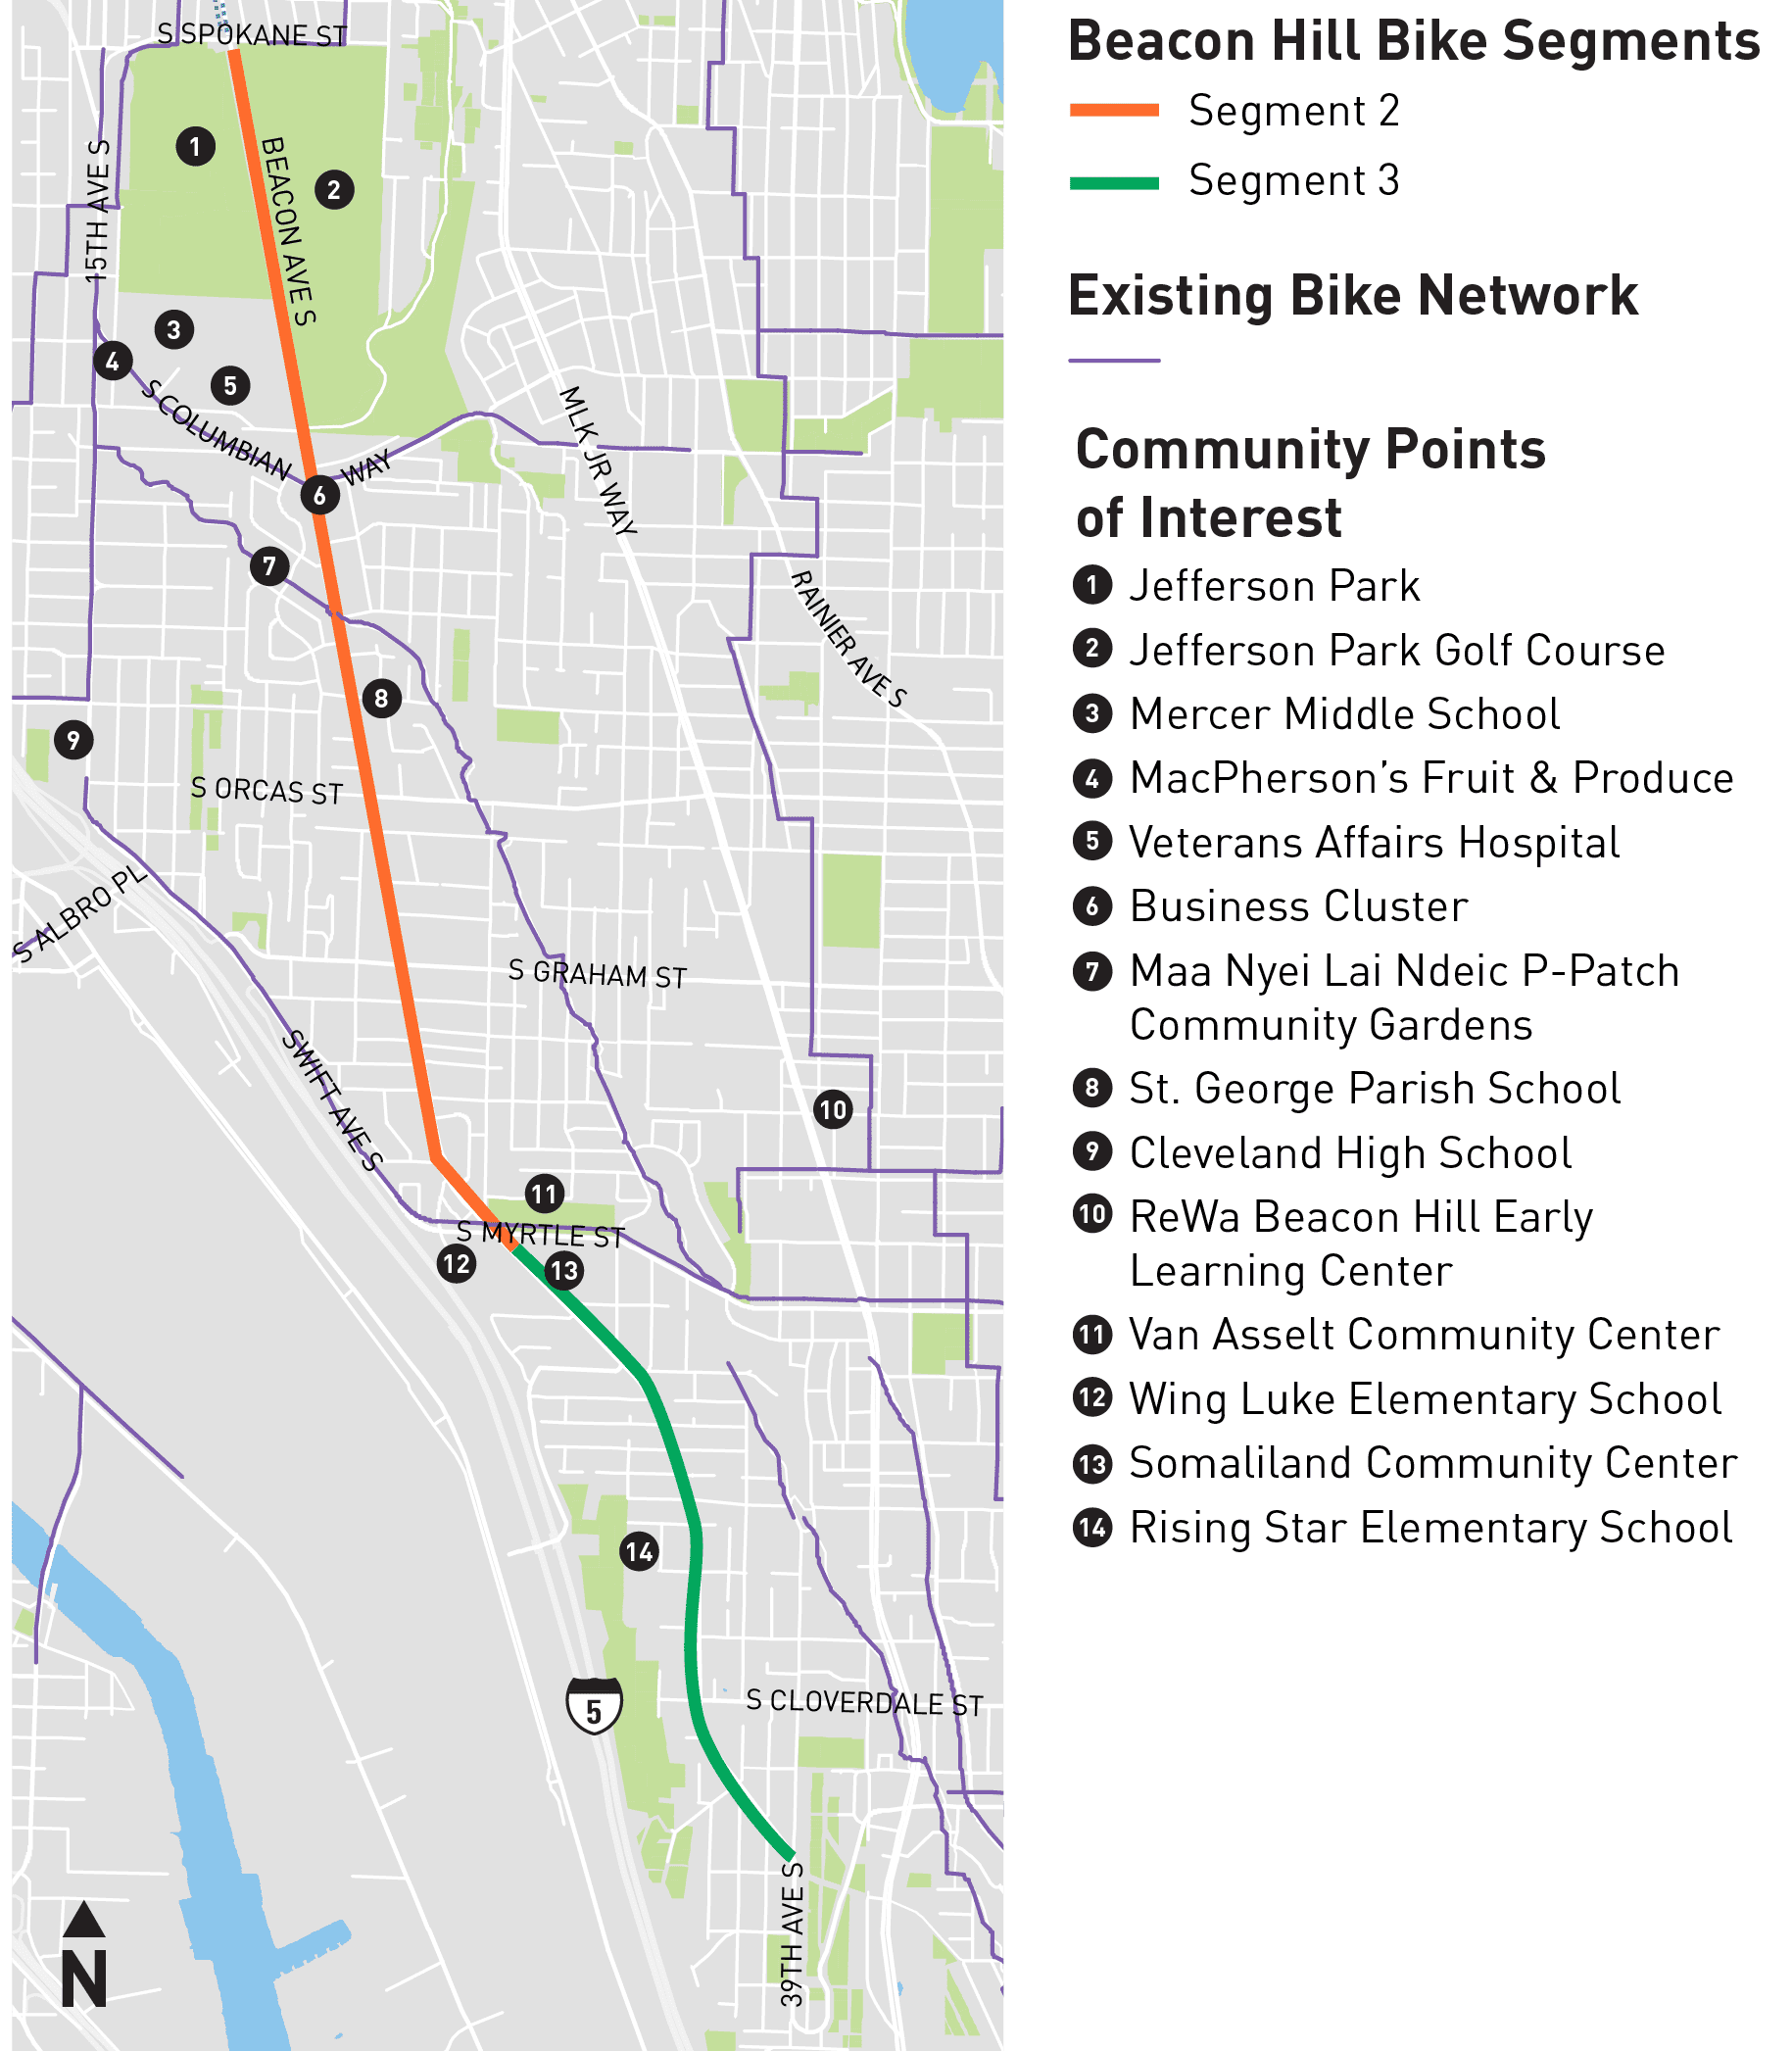 Map showing Beacon Hill Bike Route. Orange line shows segment 2. Green line shows segment 3.  Segment 1 will extend from Dr. Jose Rizal Bridge to S Spokane St, Segment 2 will cover S Spokane St to S Myrtle St,